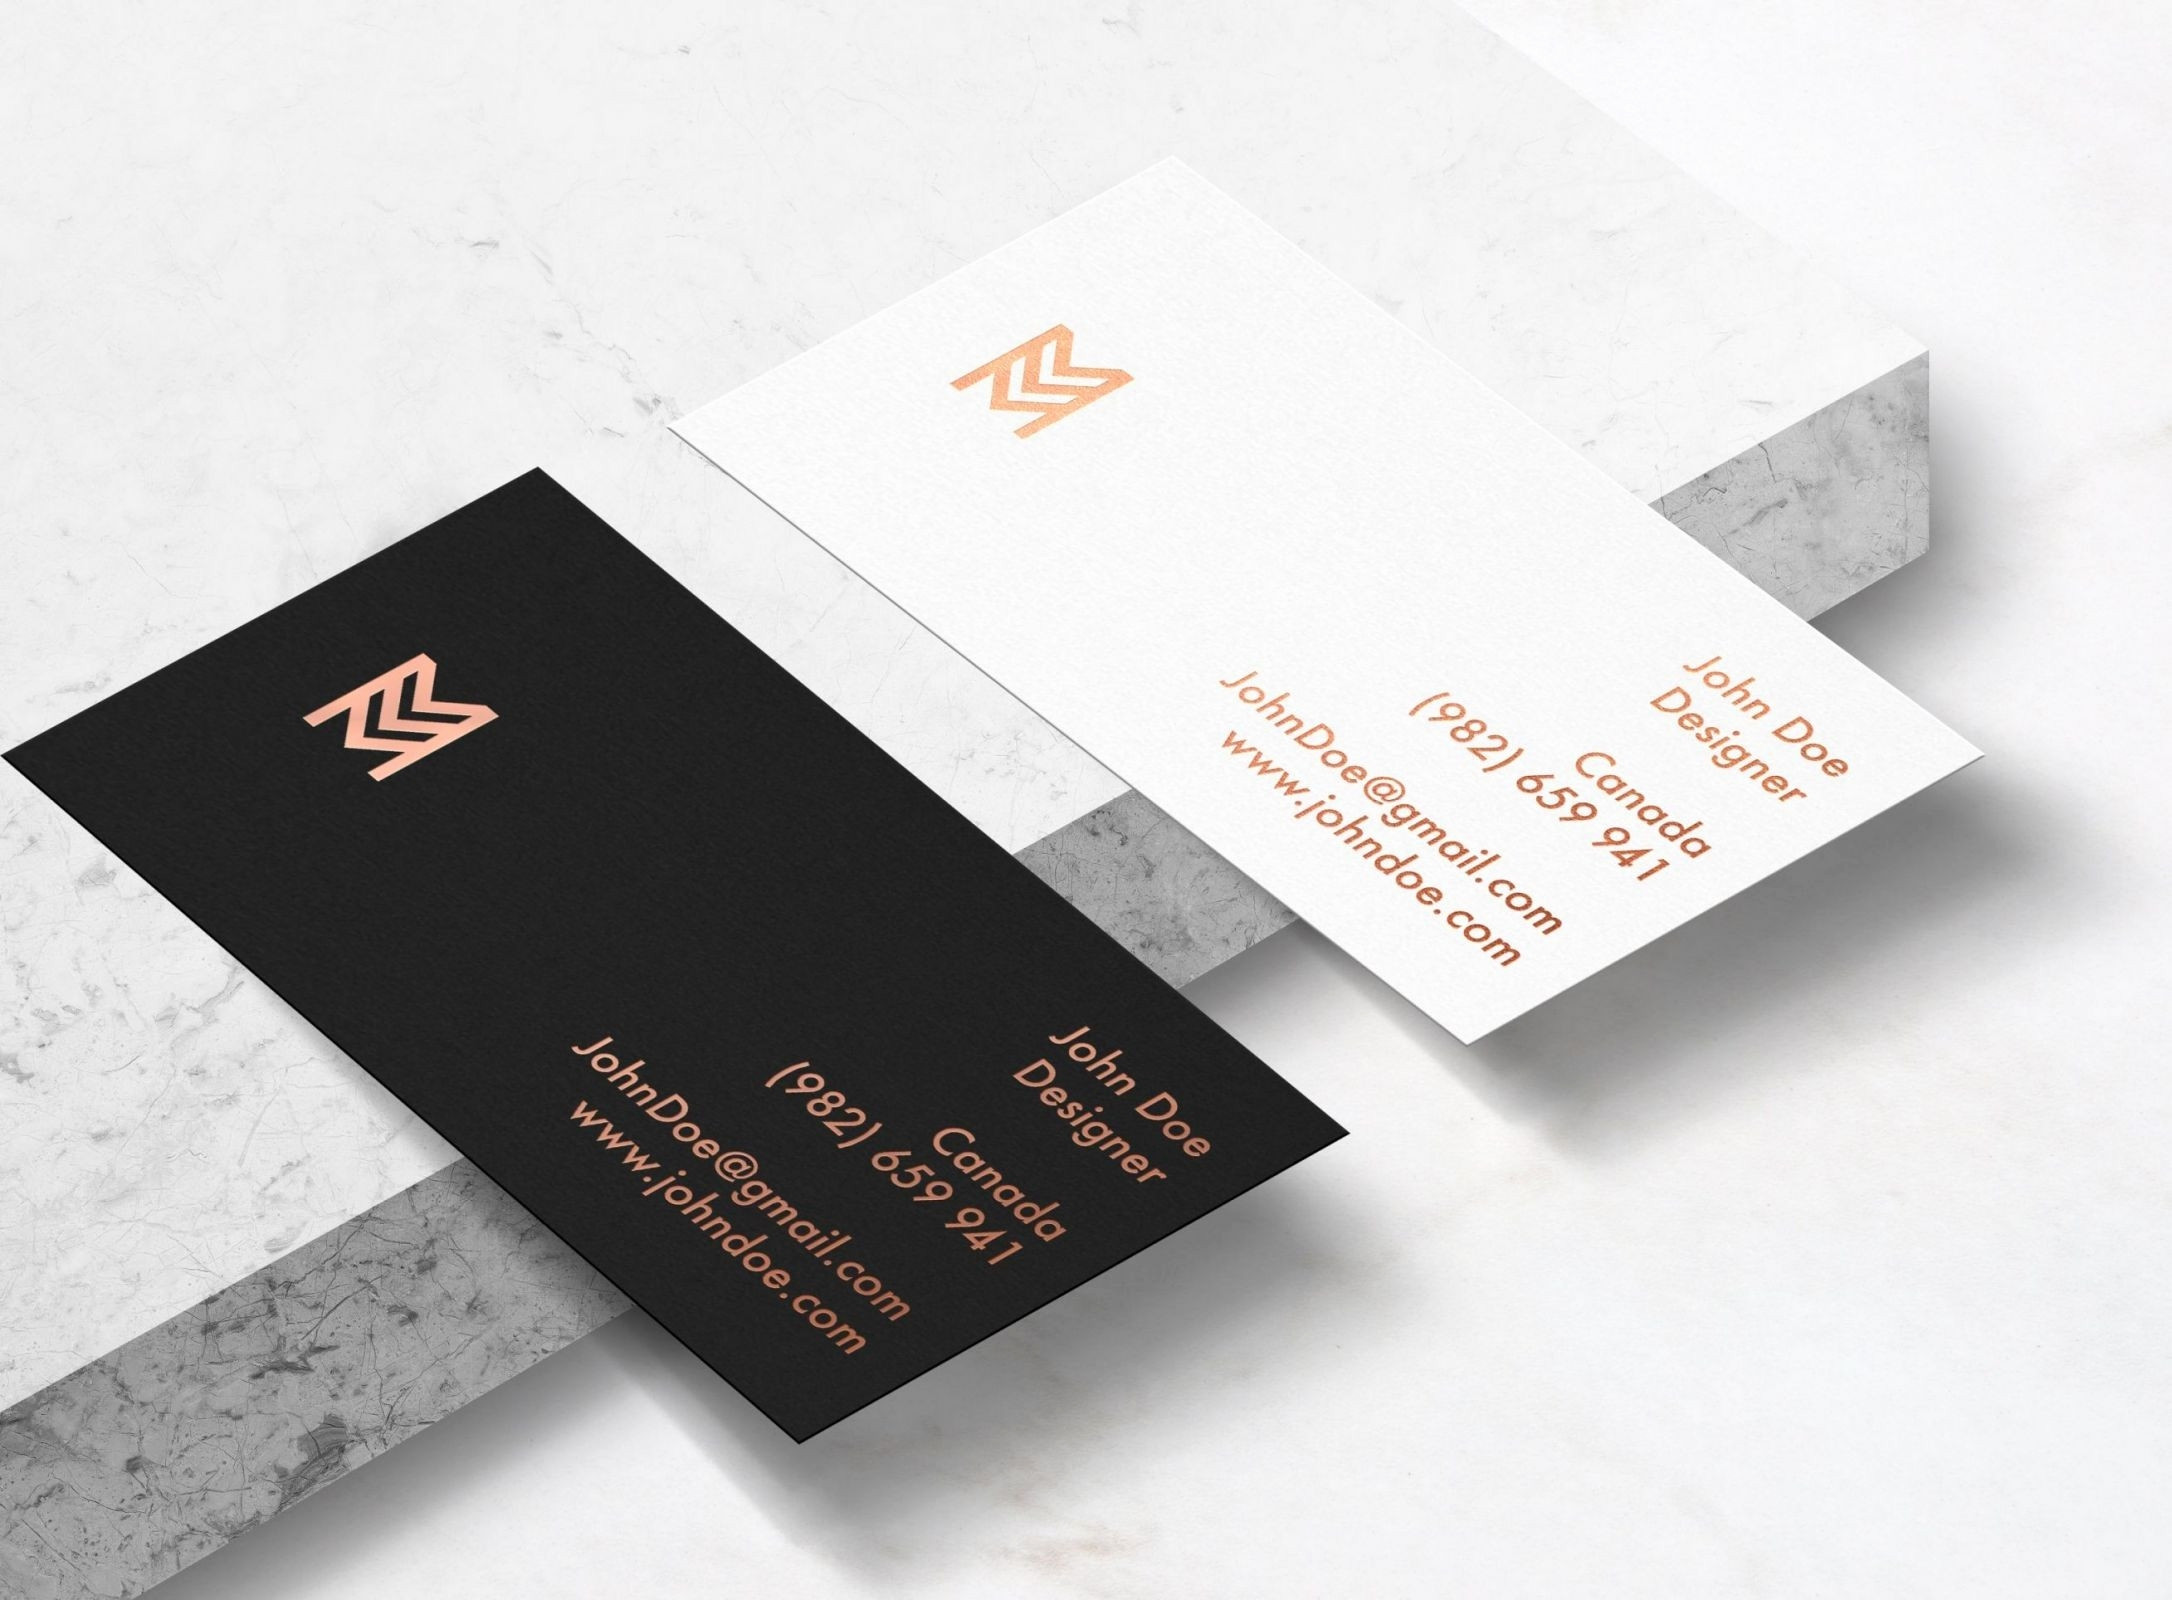 Hairdressing Business Cards Ideas Beauty Salon Designs Of Salon Business Cards Templates Free